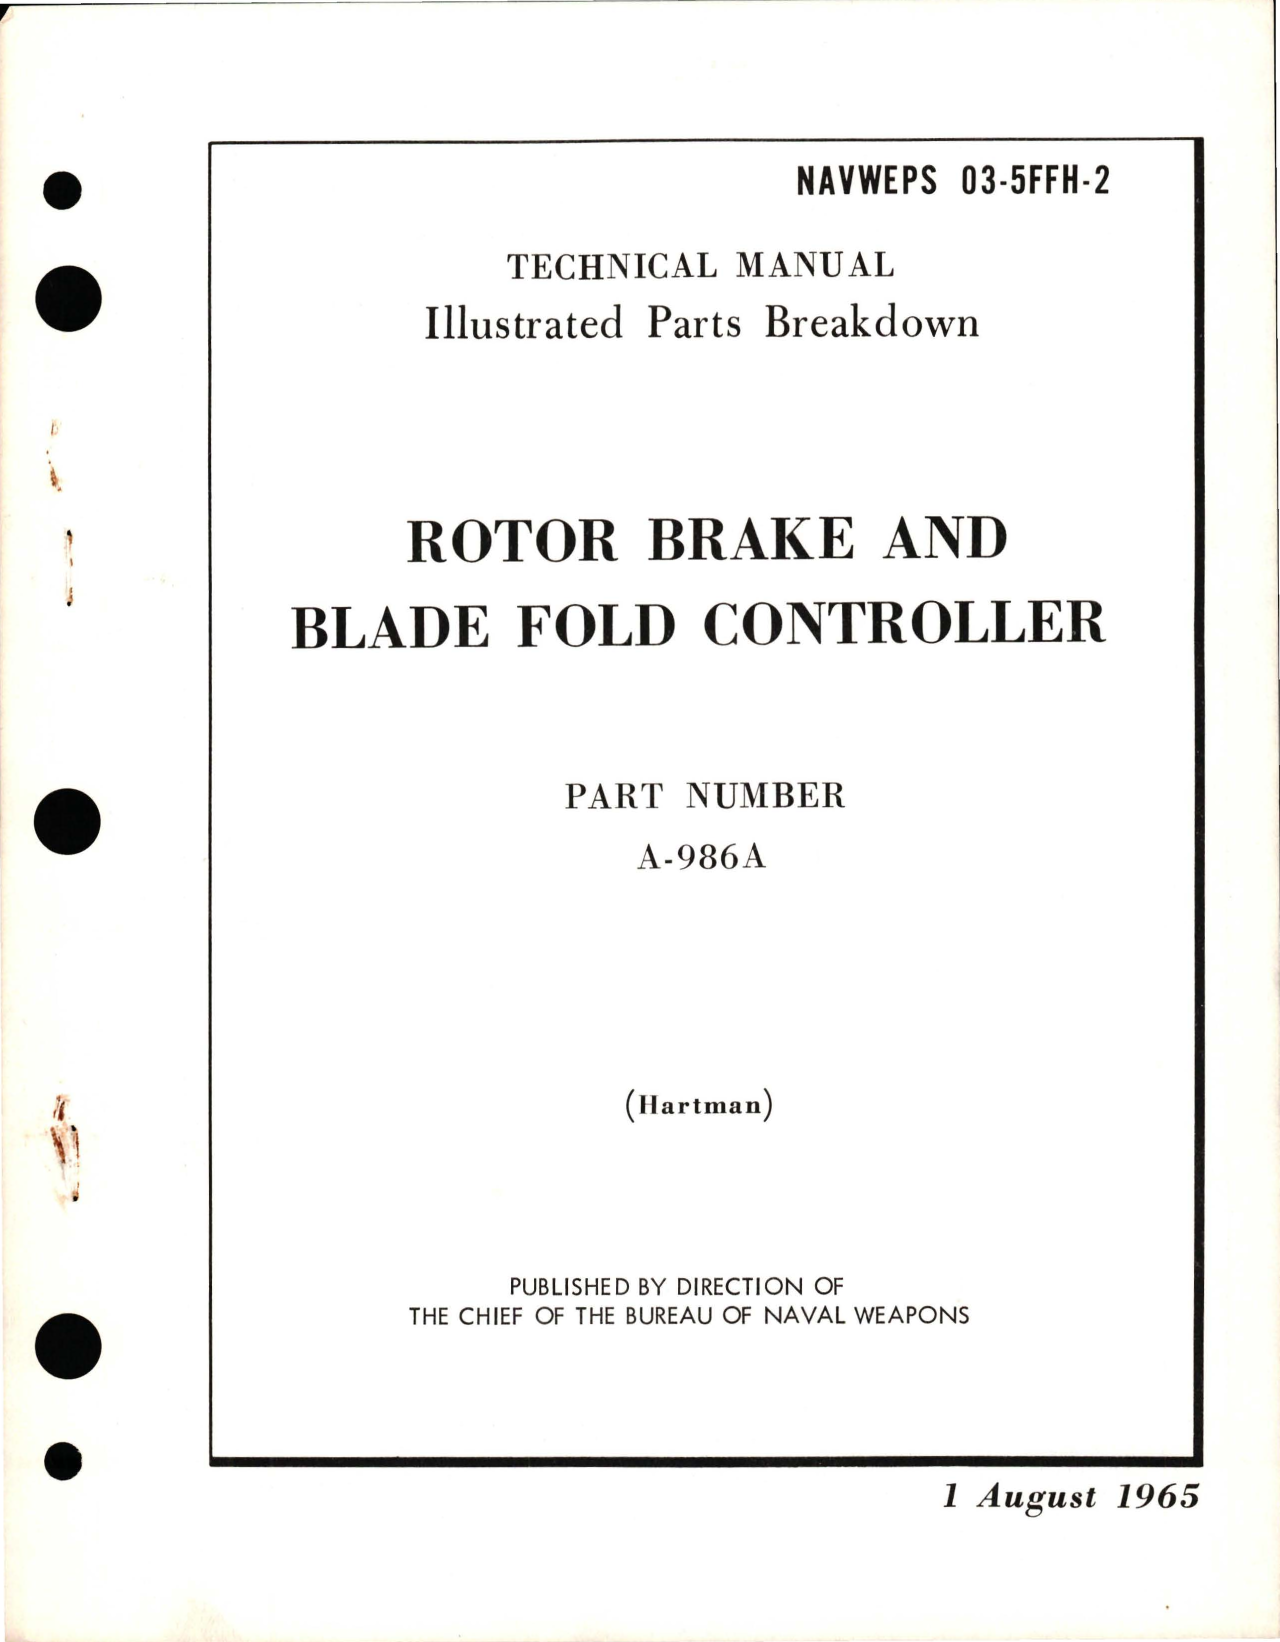 Sample page 1 from AirCorps Library document: Illustrated Parts Breakdown for Rotor Brake and Blade Fold Controller - Part A-986A